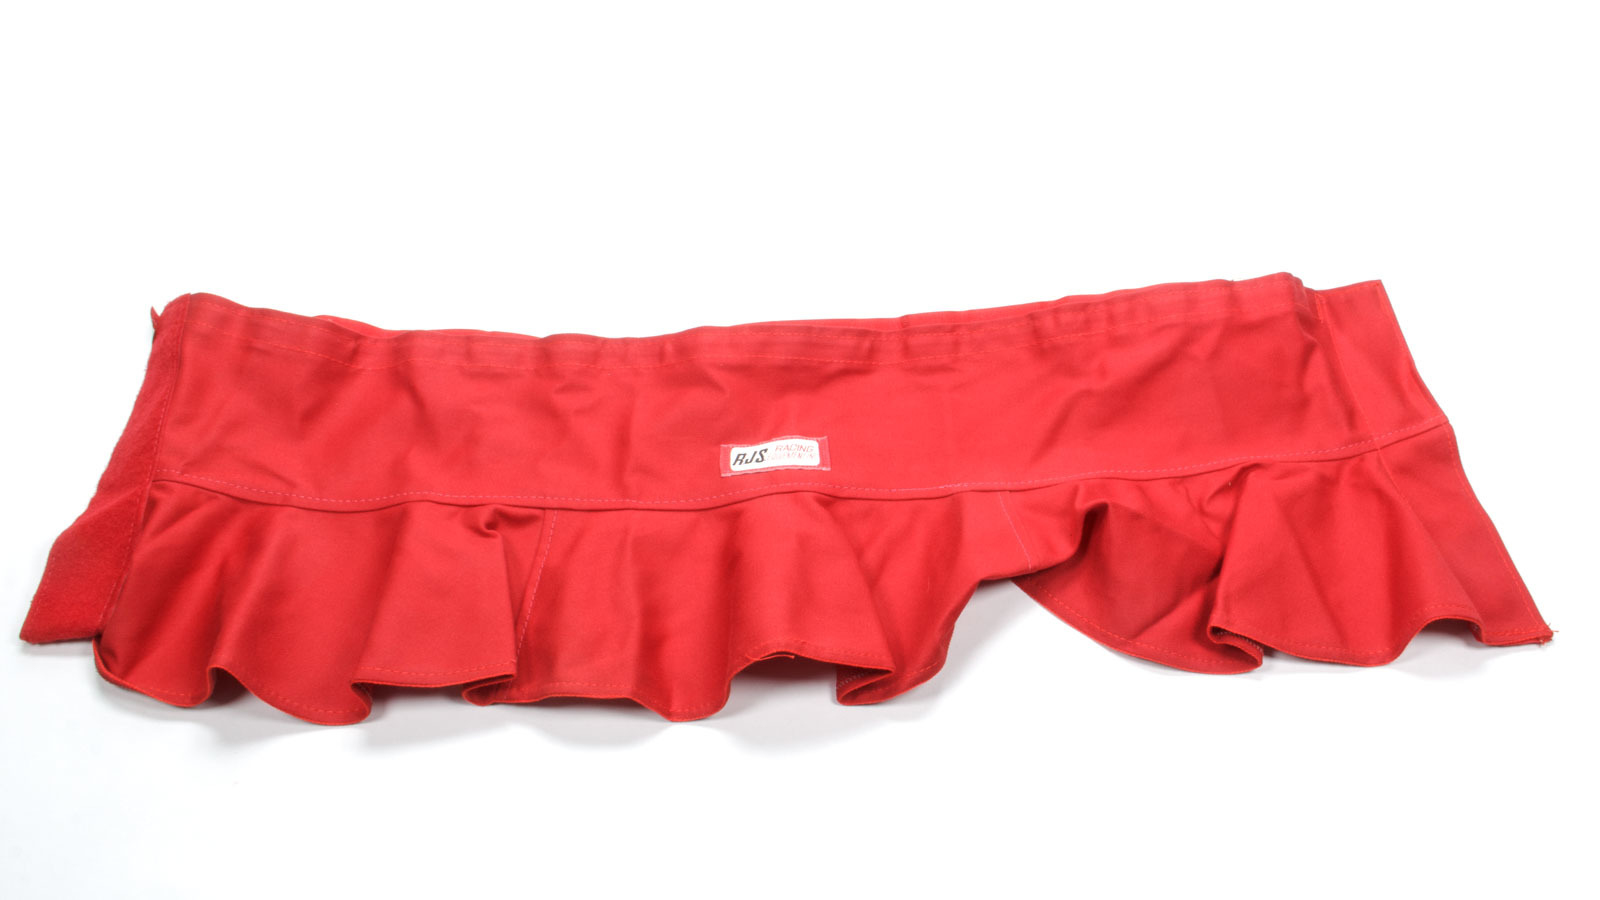 RJS Safety 11000604 - Helmet Skirt, Hook and Loop Attachment, Fire Retardant, Red, Each